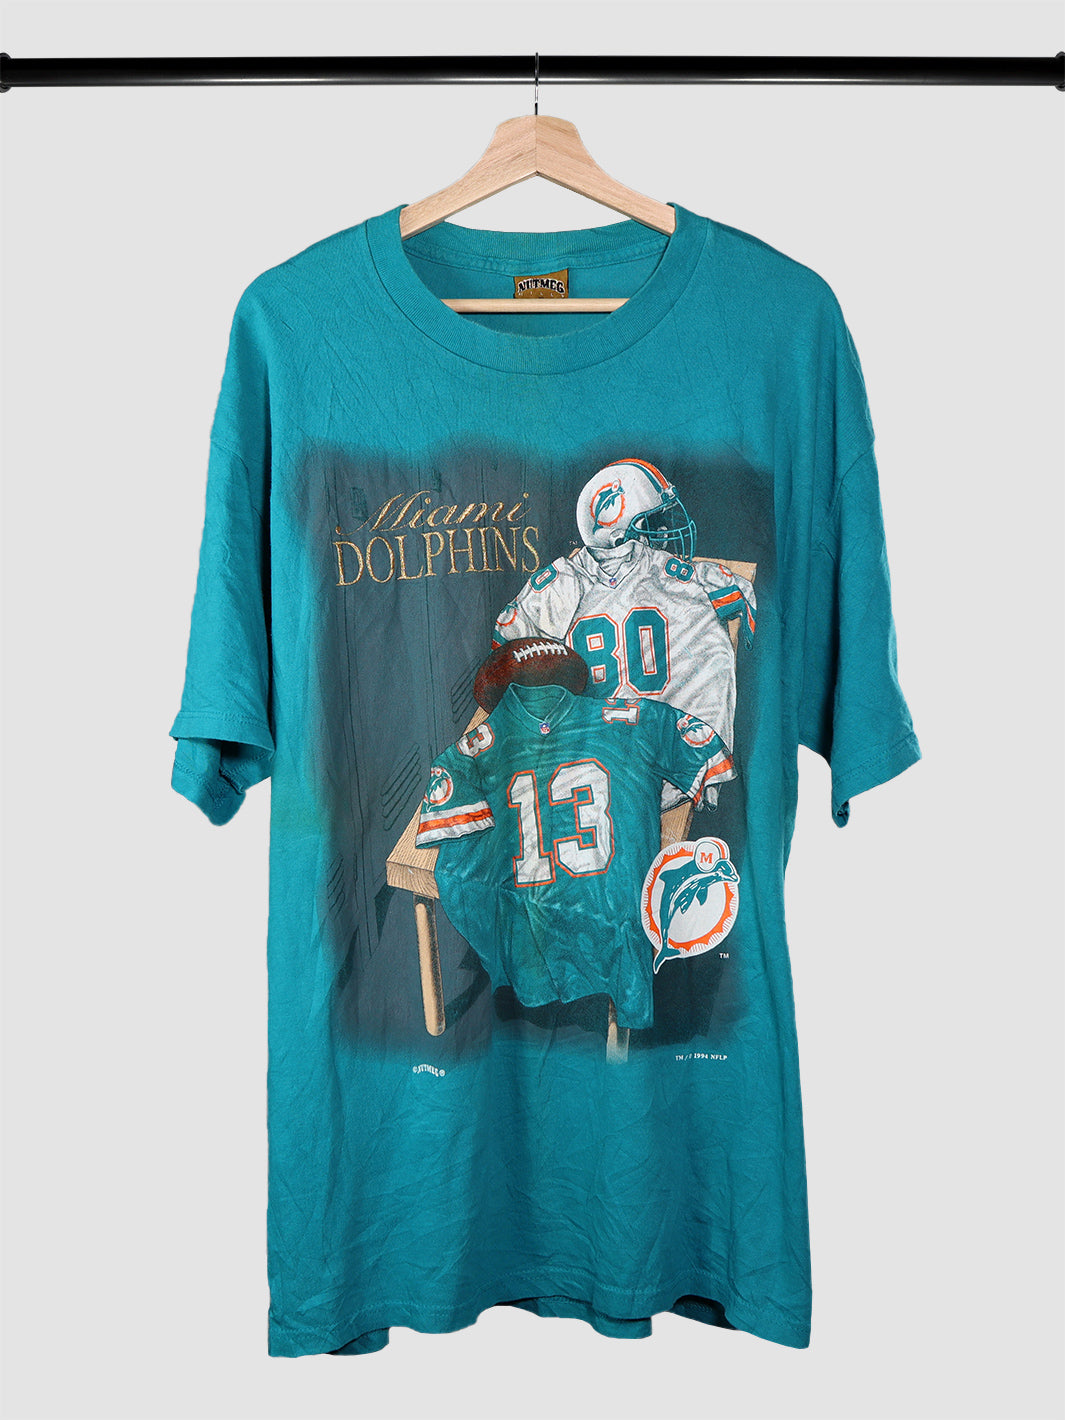 Vintage 1994 Miami Dolphins tshirt hanging on a rack.